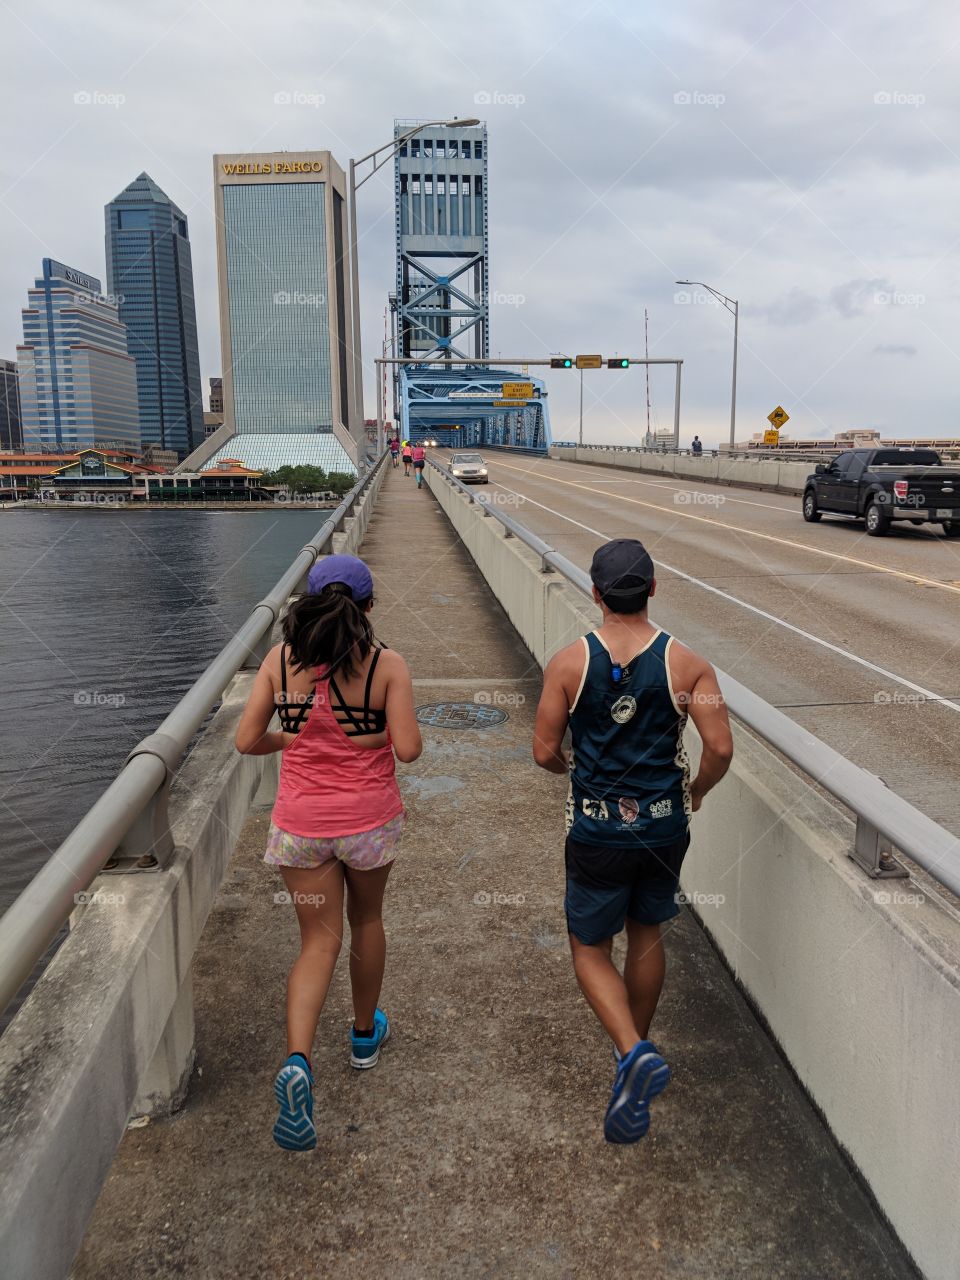 Runners on bridge over water facing the city in an urban landscape. Jacksonville Florida. Blue bridge view.